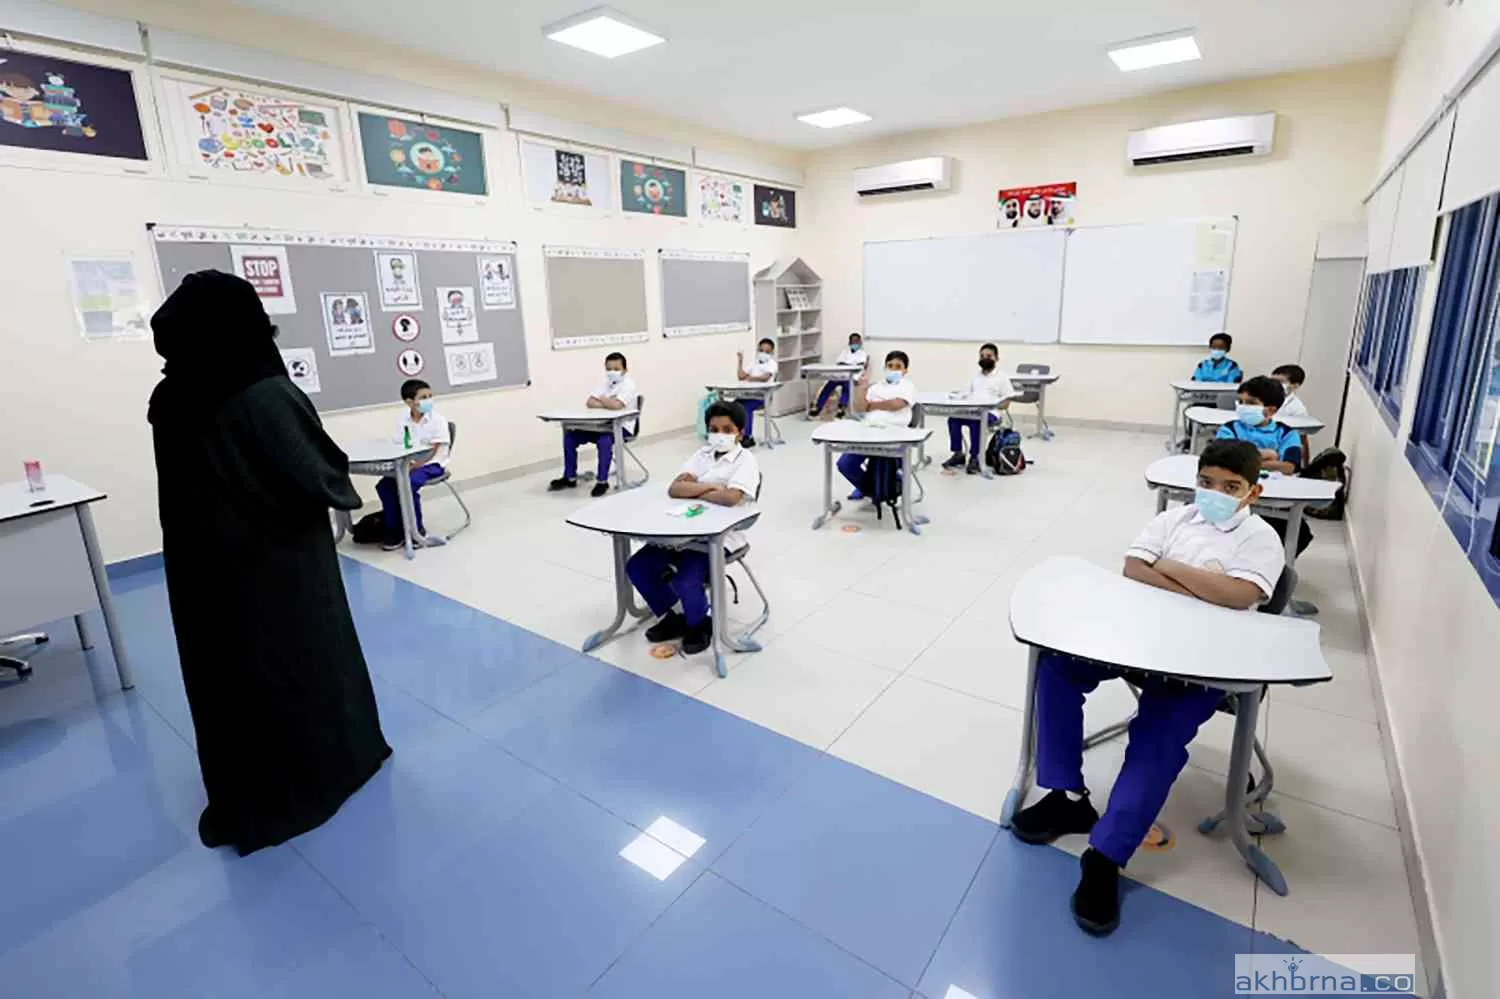 opening of a school with a fee of 4 thousand dirhams in UAE